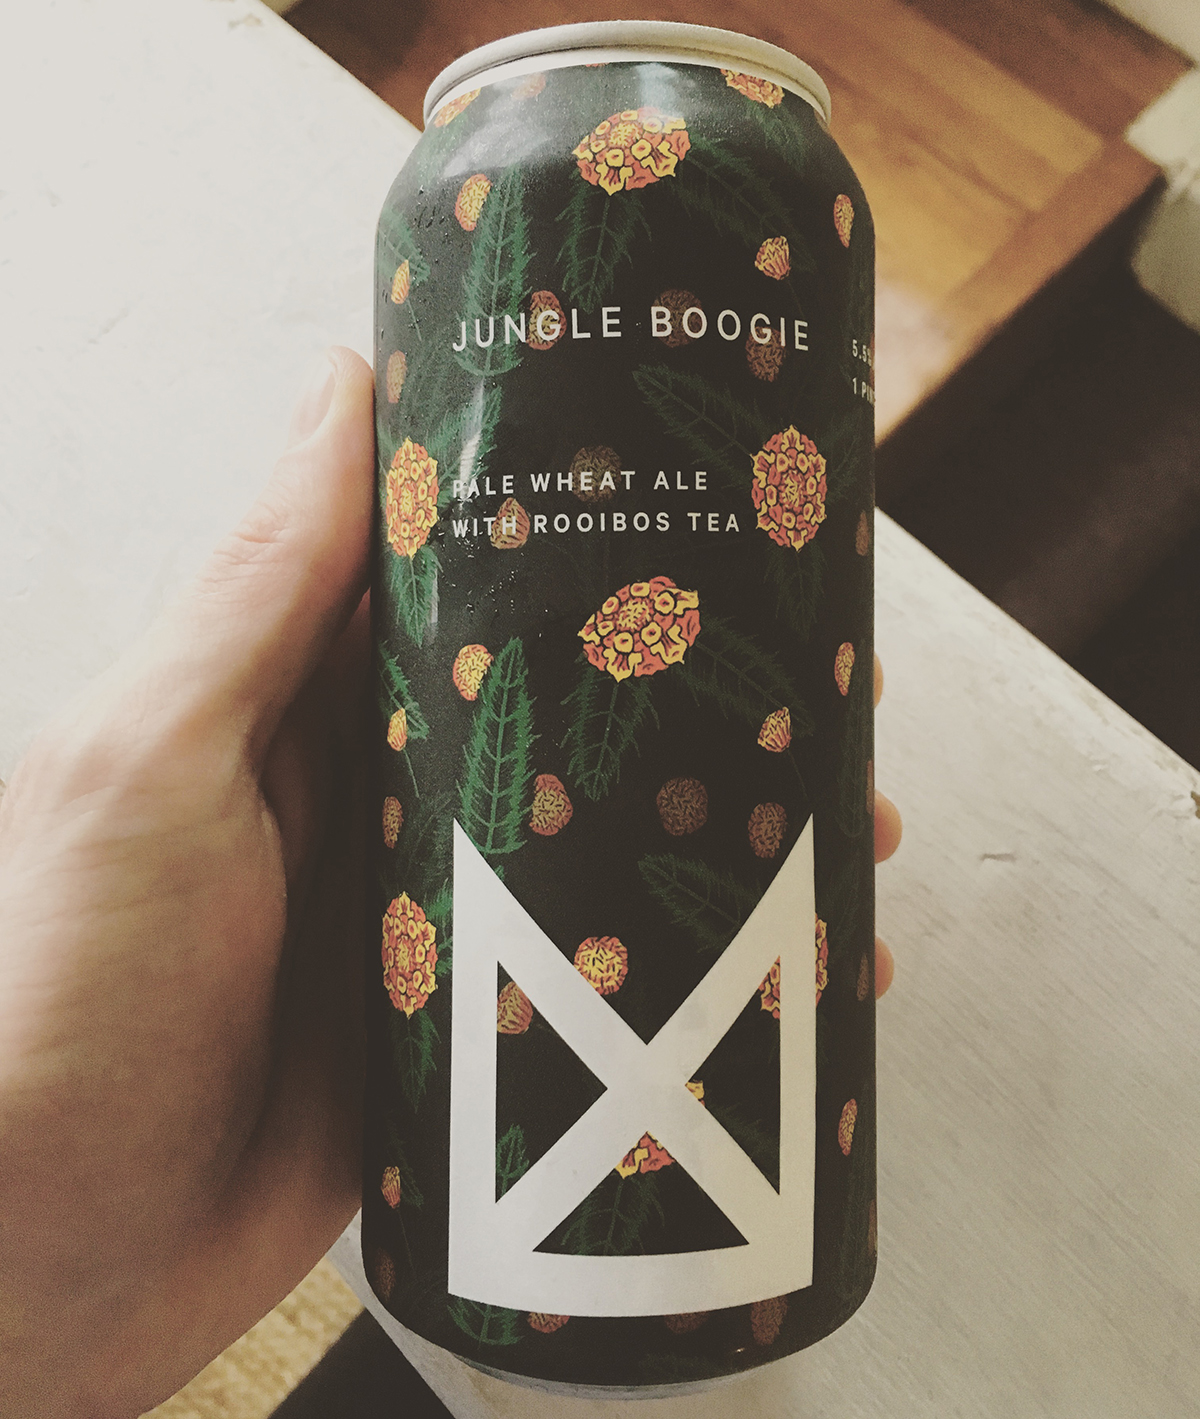 Jungle Boogie by Marz Community Brewing Company. / Photo by Alex Wilking